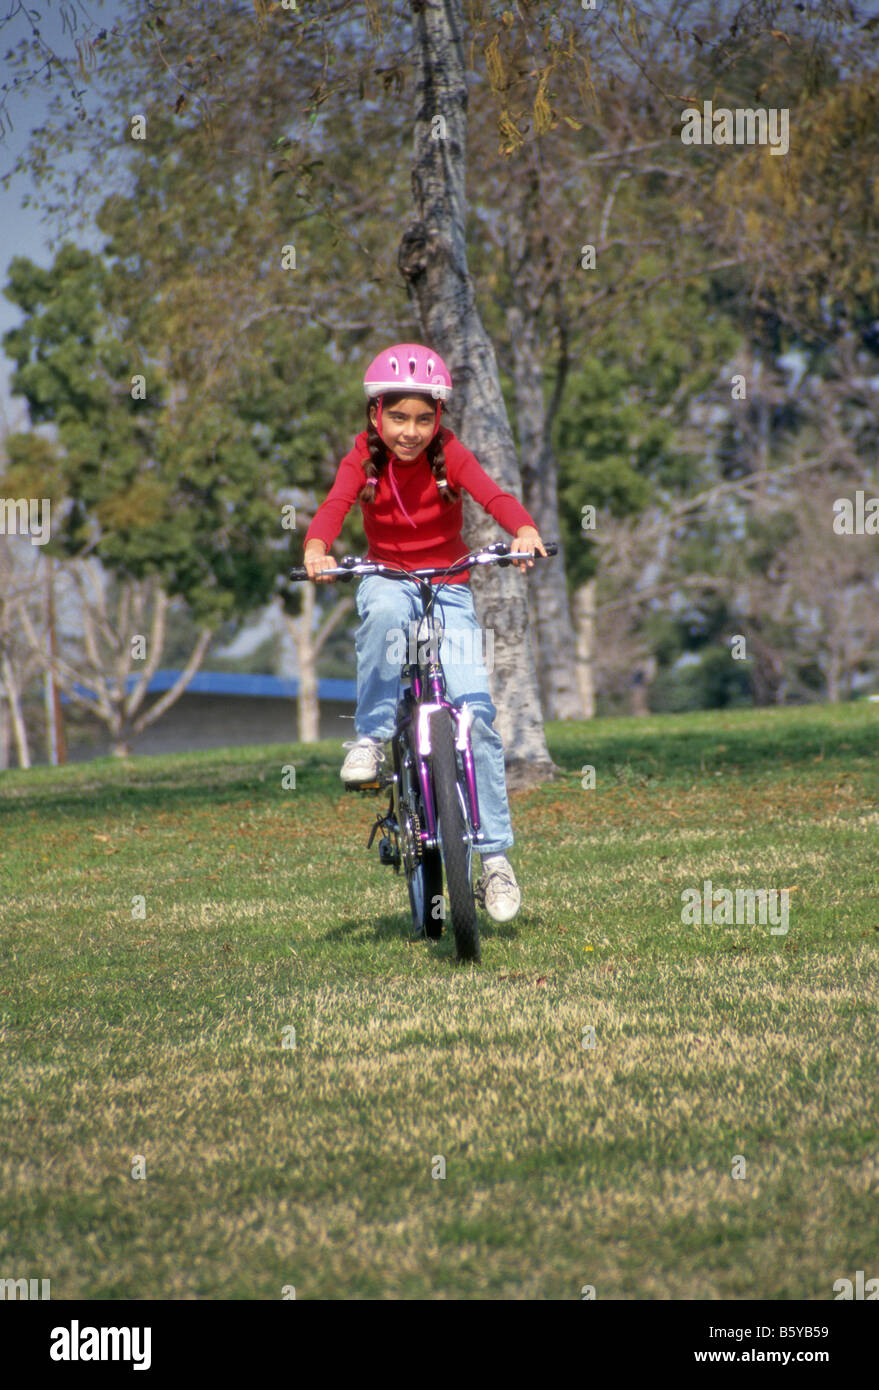 Young girl wearing safety helmet rides bicycle on grass in park Stock Photo